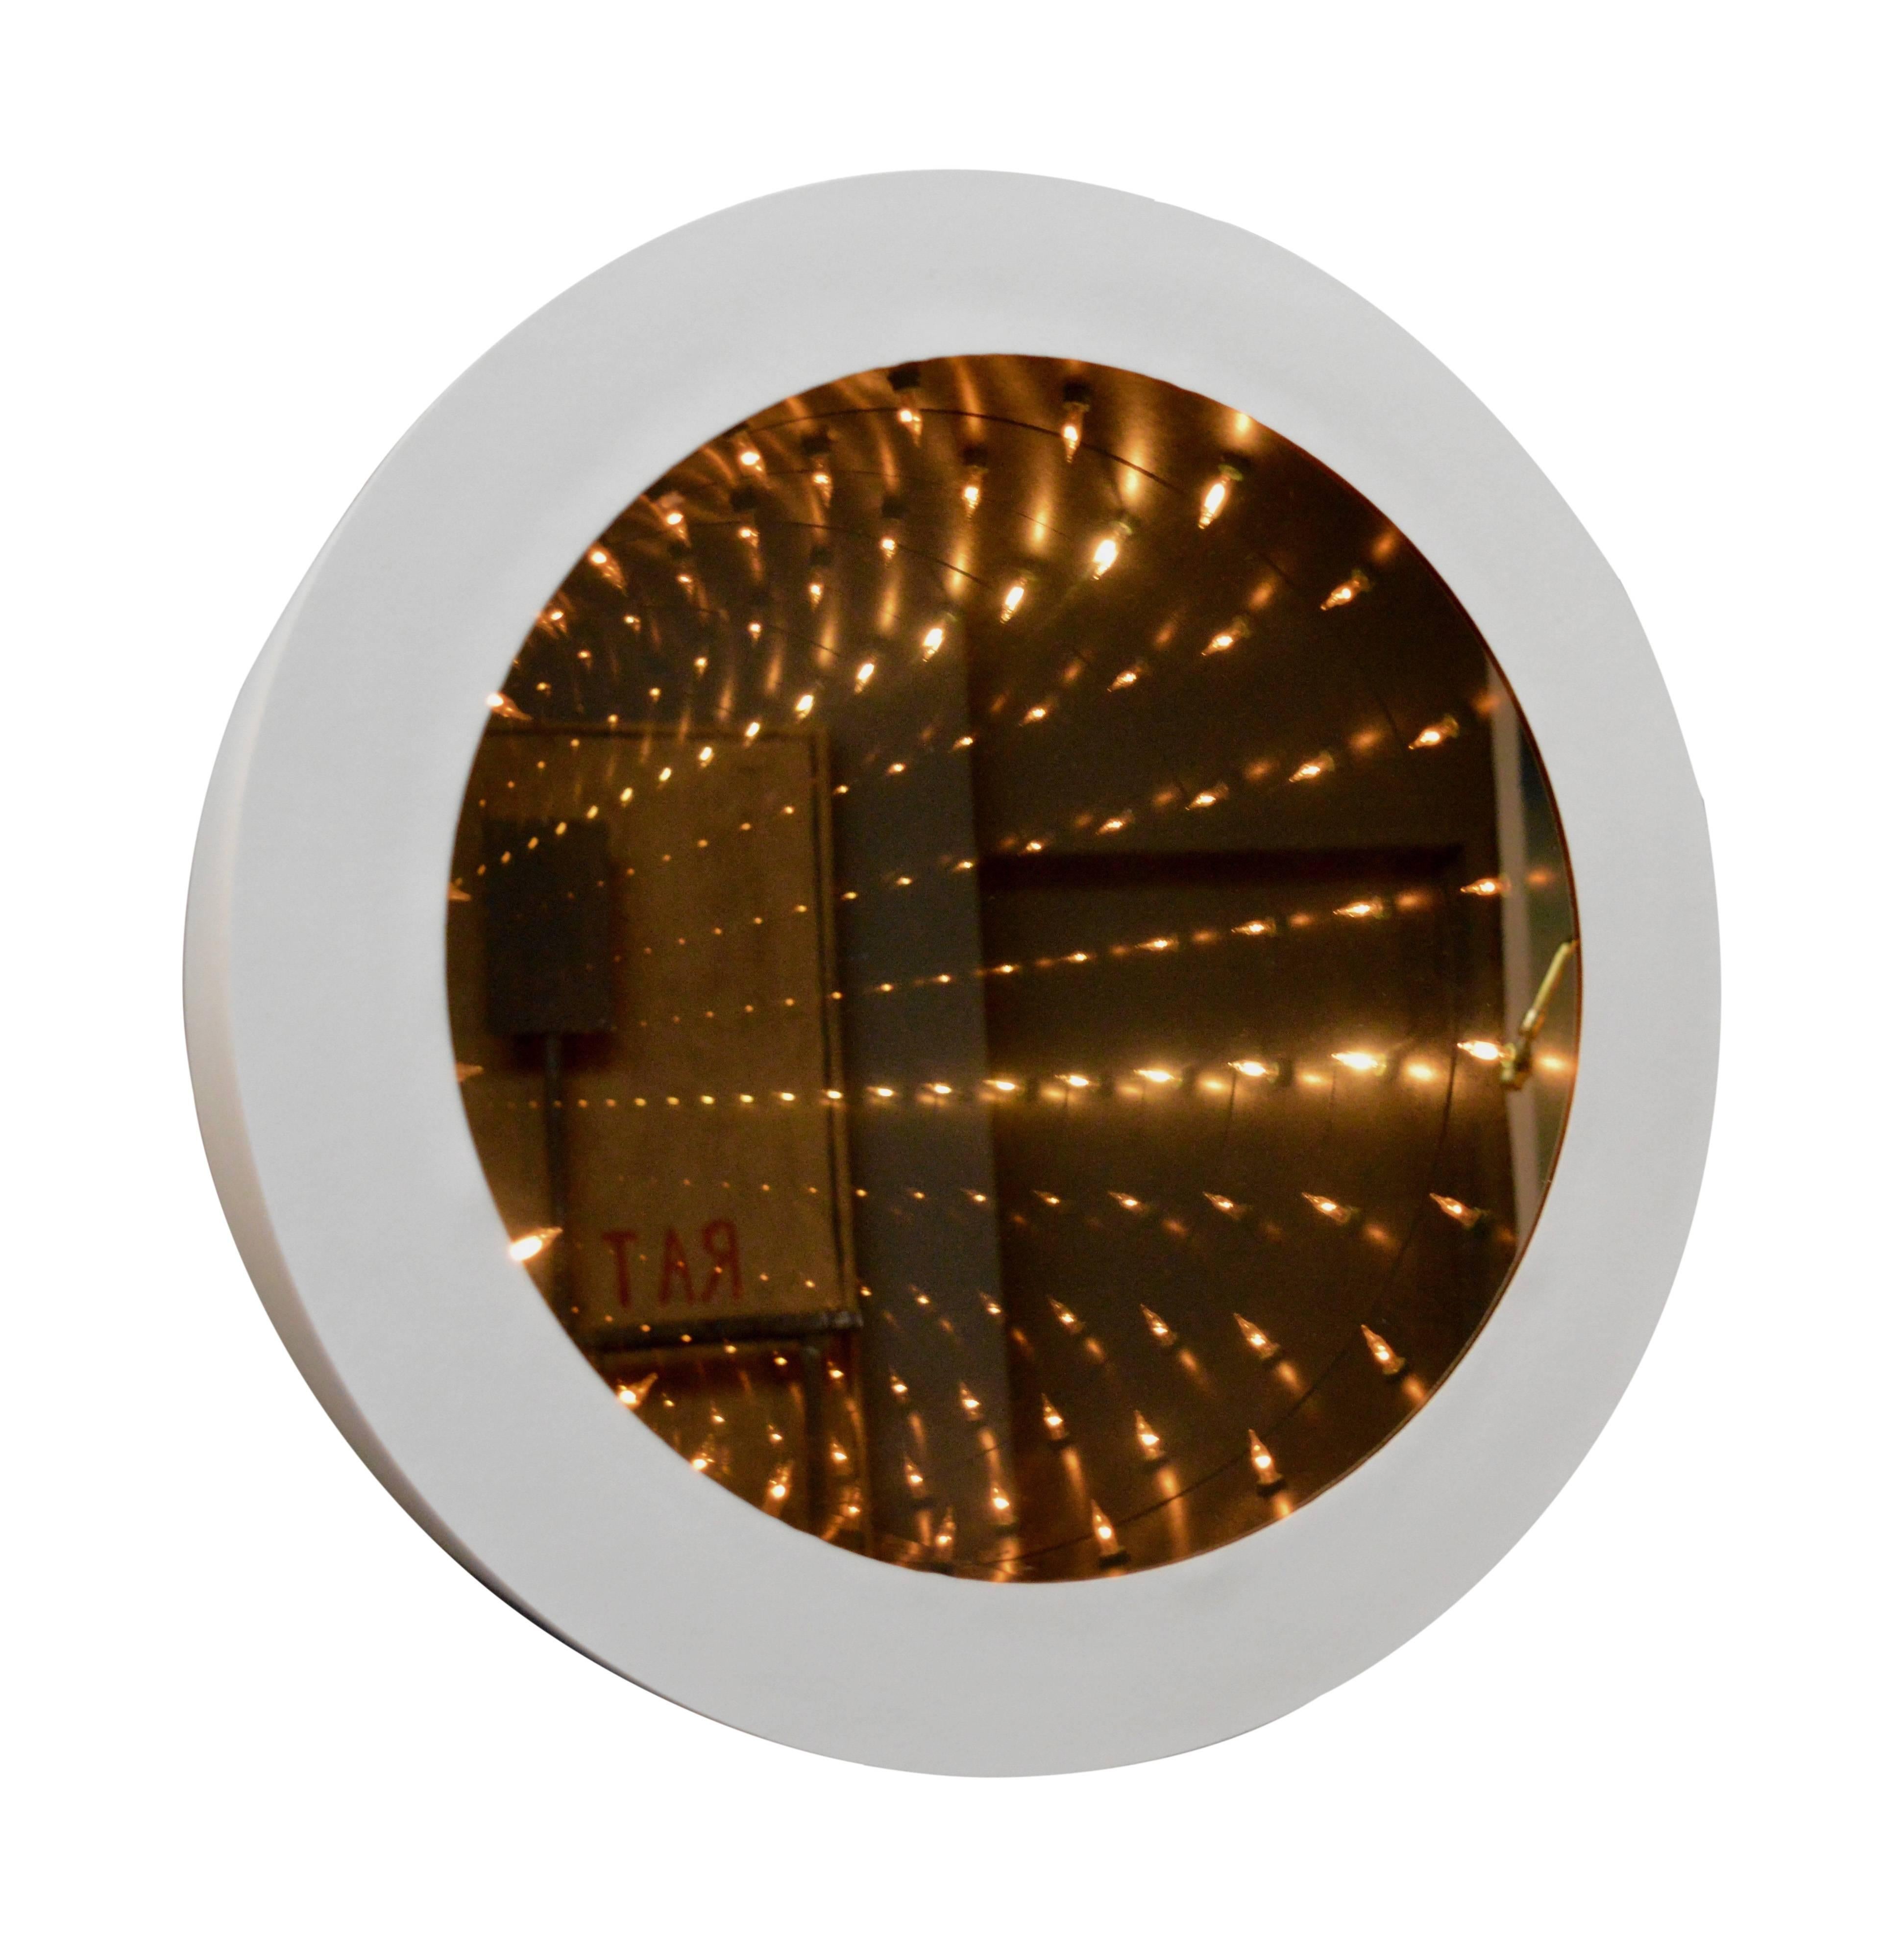 Large-scale vintage infinity mirror. Dark mirrored glass with white frame. Perfect working order. Newly rewired in ivory cloth twist cord. Excellent vintage condition. Amazing piece of art! Only one available.